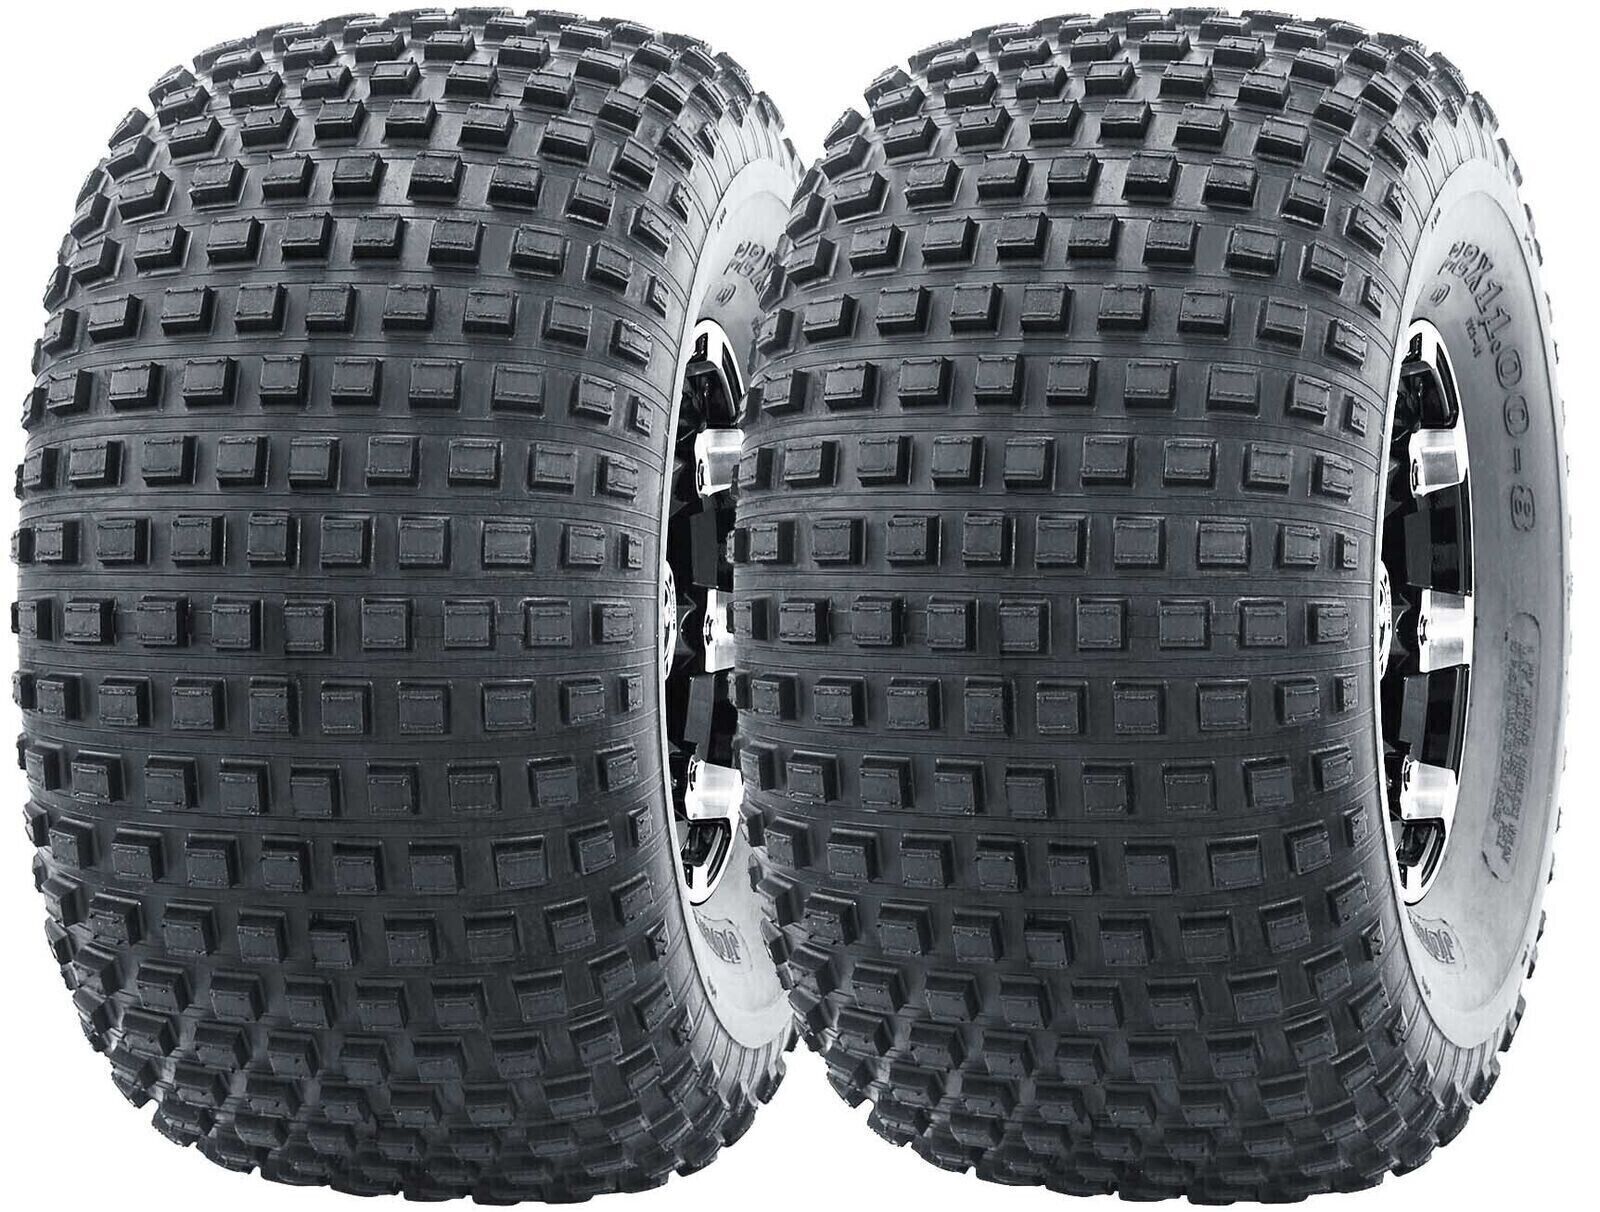 TWO (2) New Deestone D929 - 25x12.00-9 Tires 2512009 25 12.00 9 KNOBBY DS7325